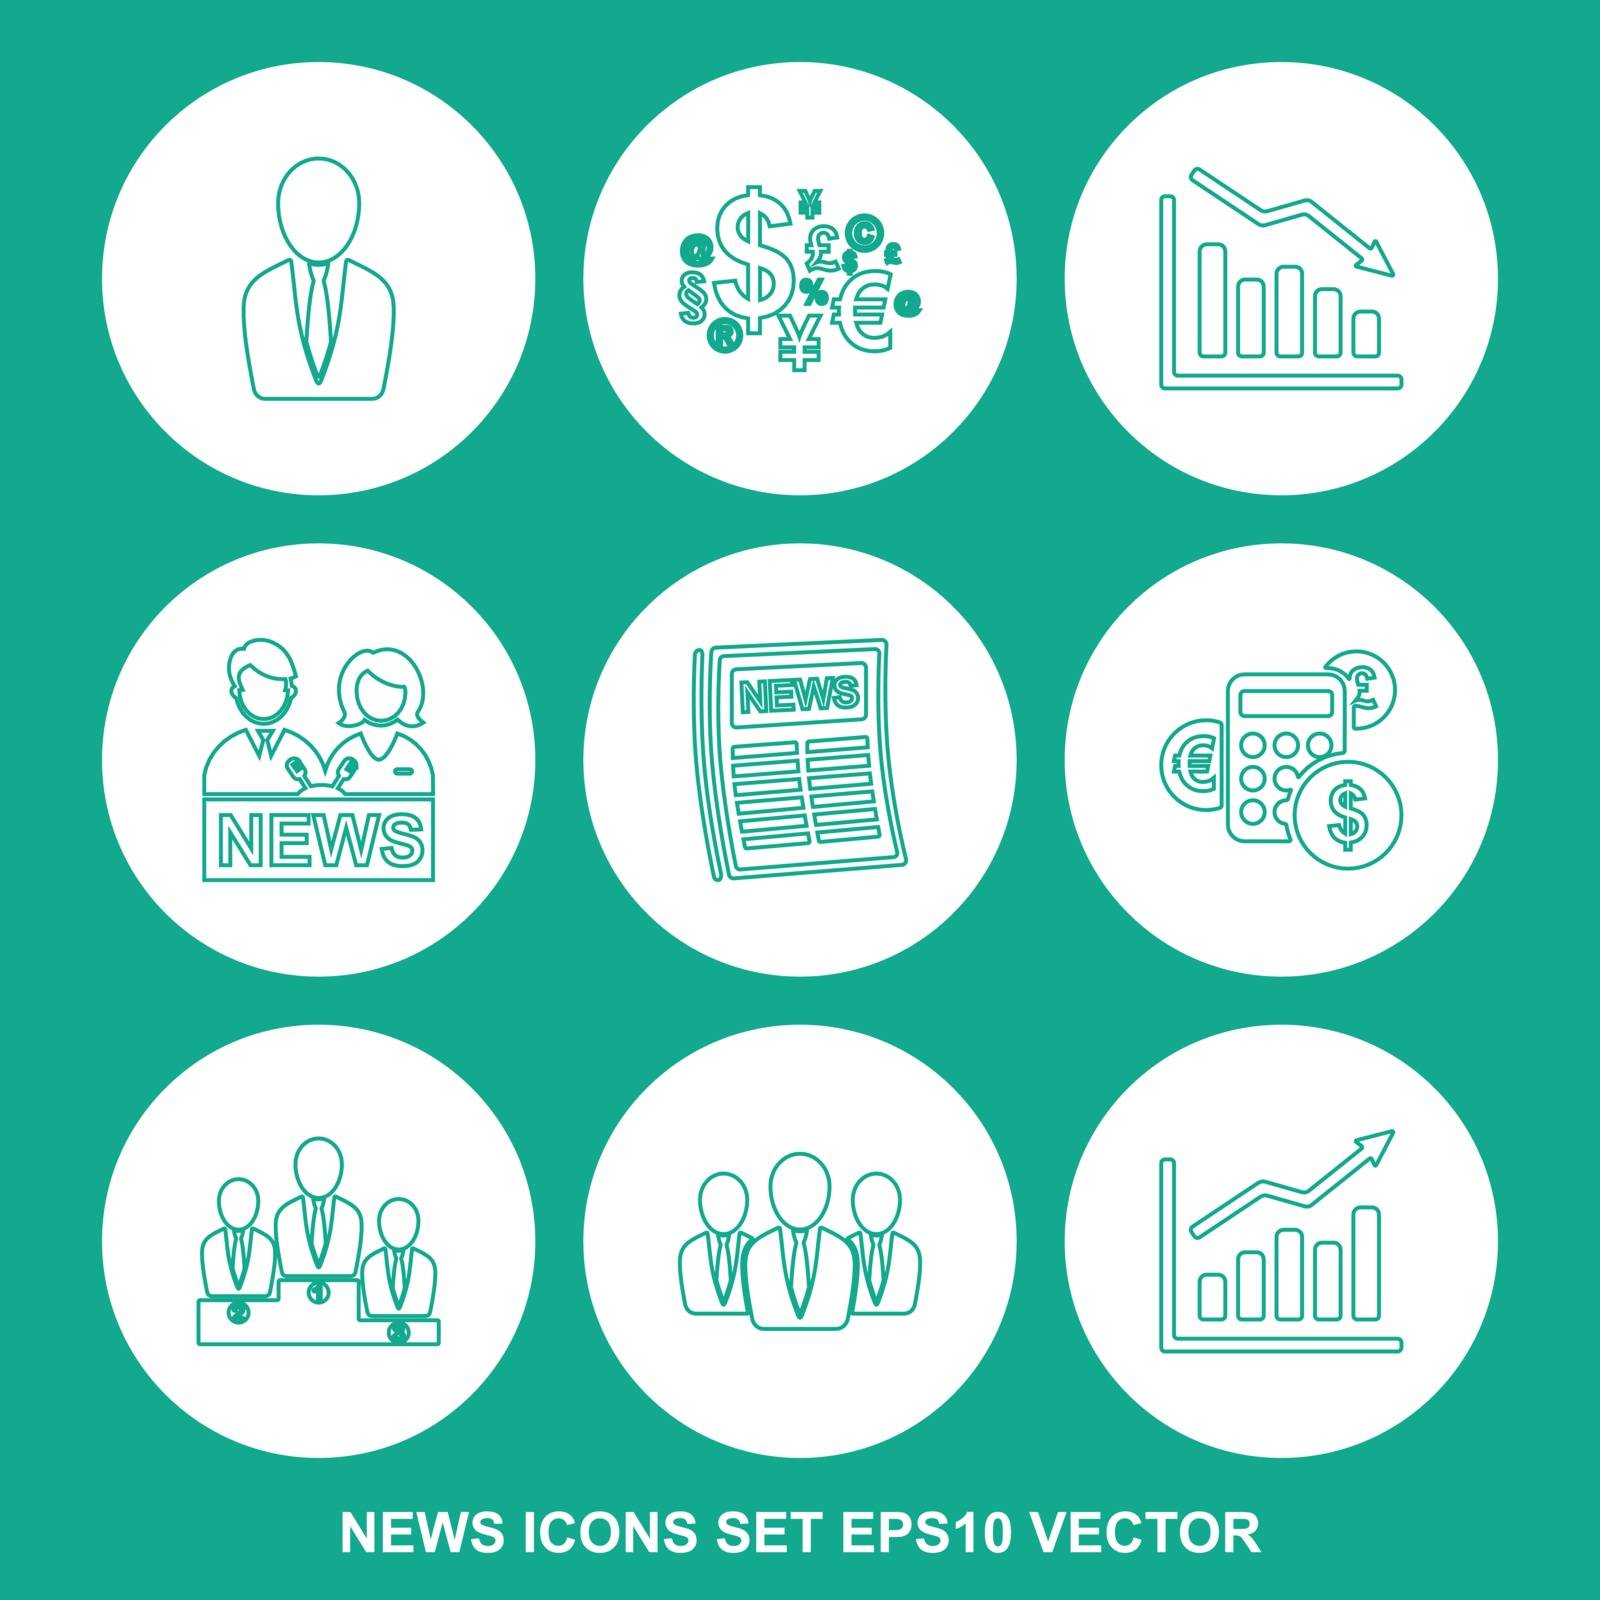 Set of news Greenlinear icons for mobile and web design. Modern flat design, thin line style. EPS 10, vector illustration.